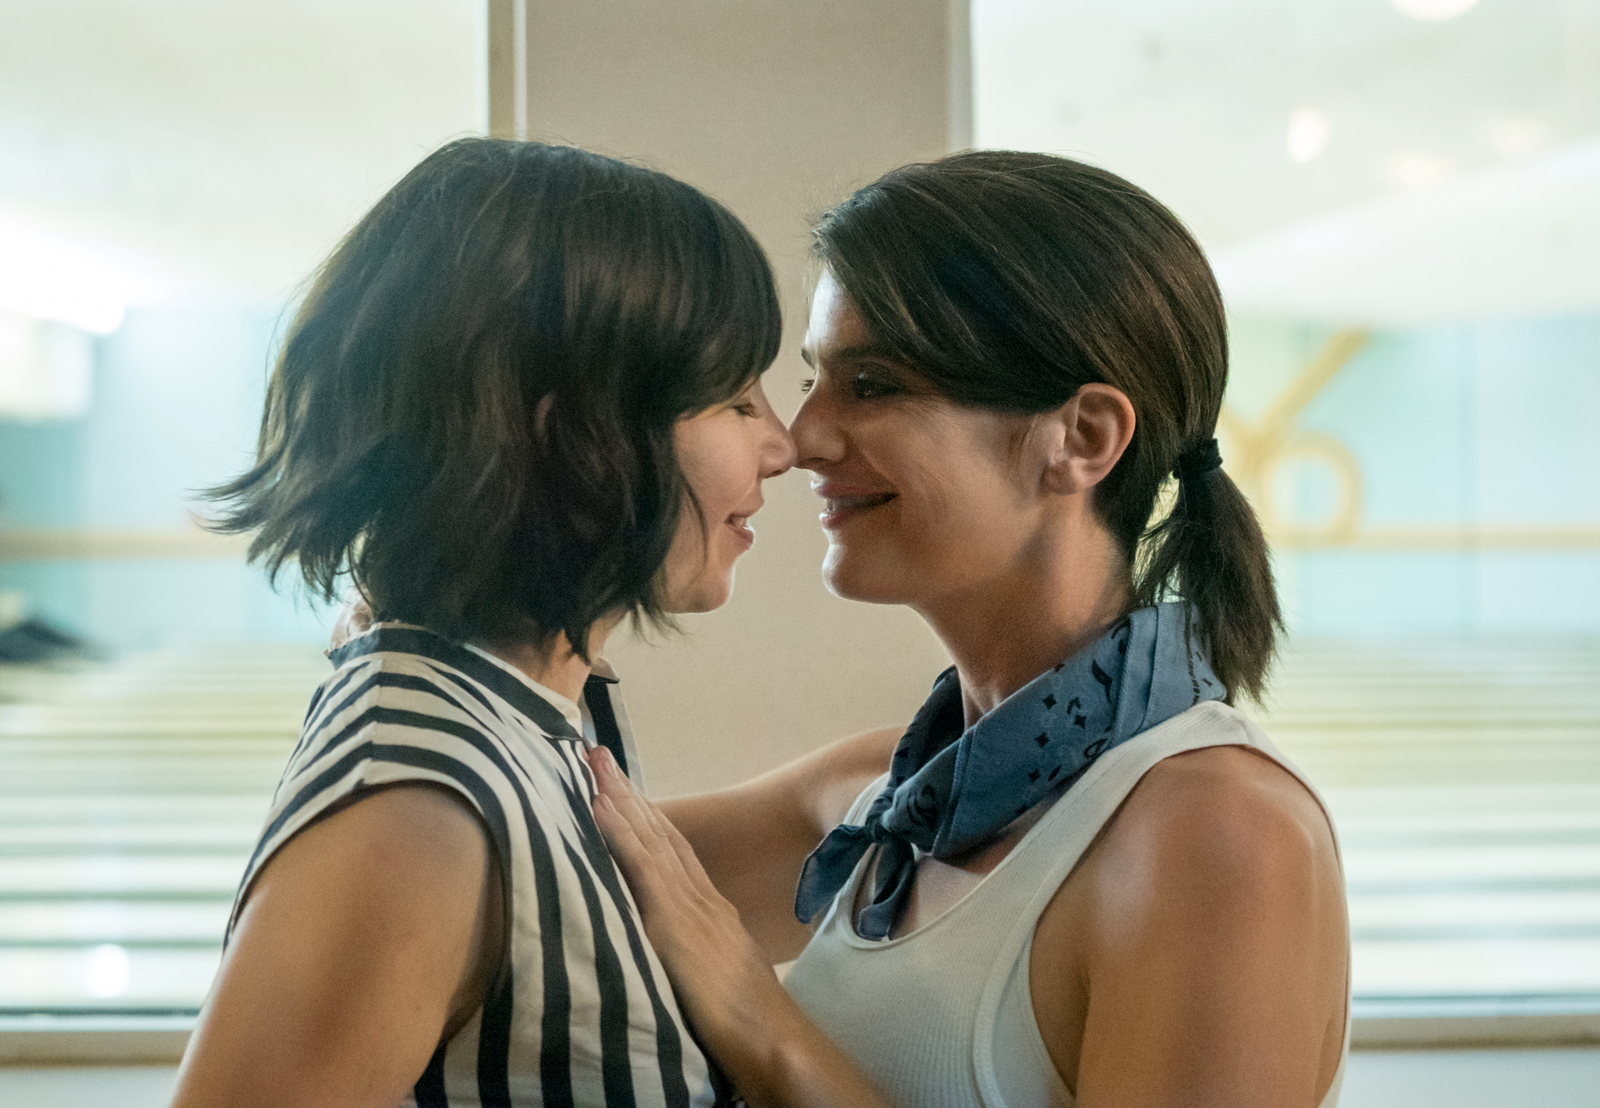 Syd (Carrie Brownstein) and Ali (Gaby Hoffman) get together on Transparent. (photo: Jennifer Clasen)